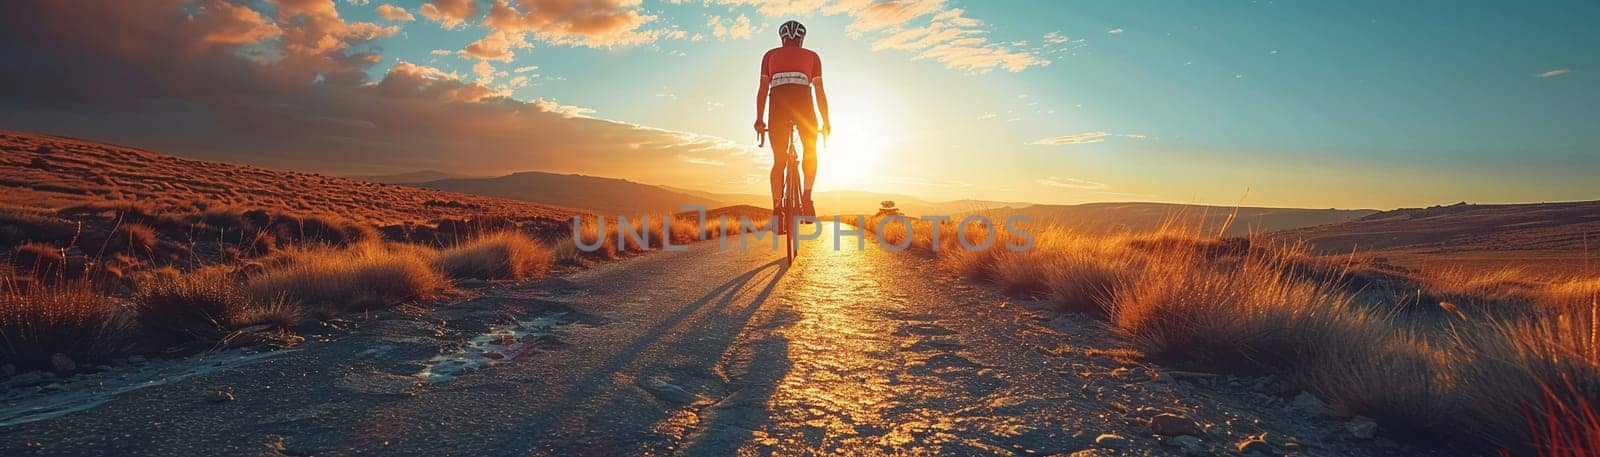 Bicyclist's shadow against the setting sun on an open road, capturing freedom and endurance